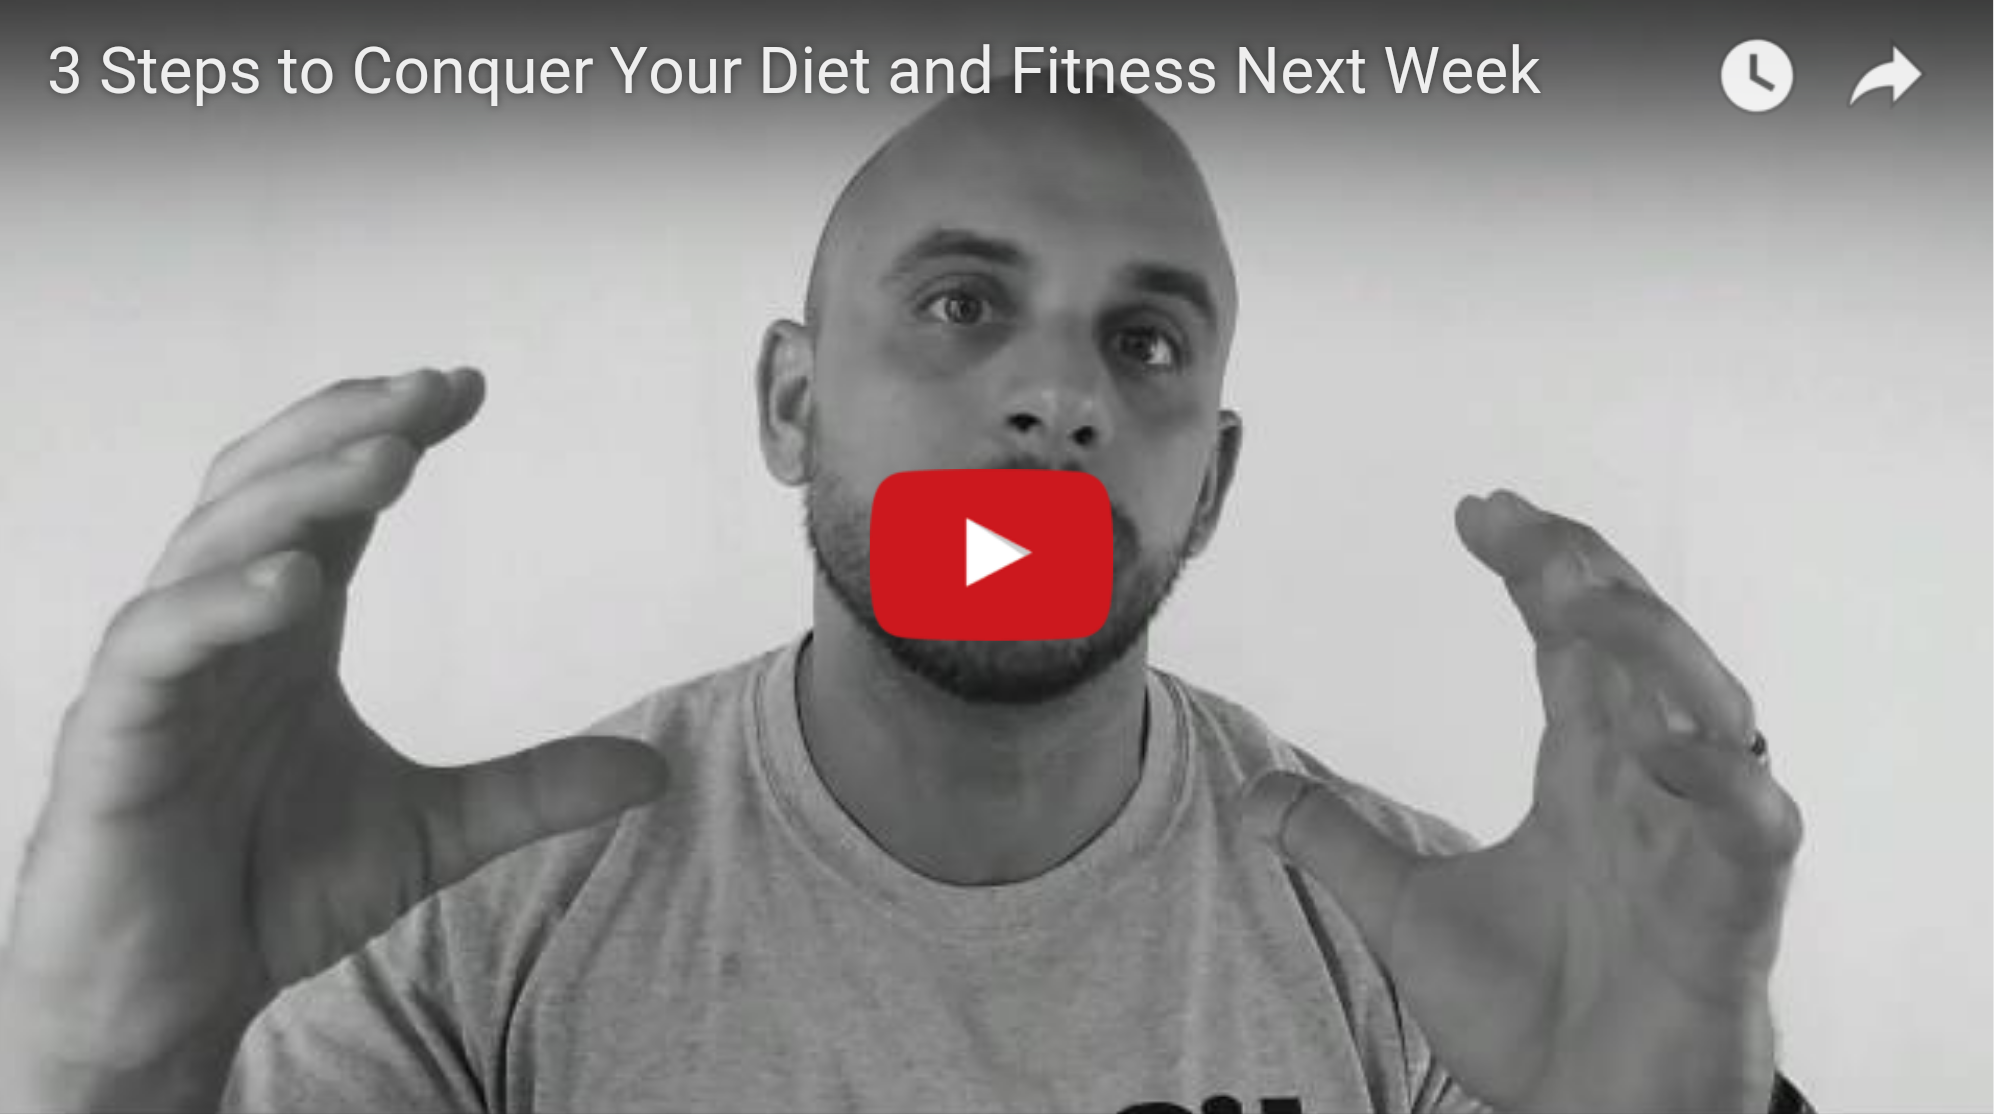 3 Steps to Conquer Your Diet and Fitness Next Week